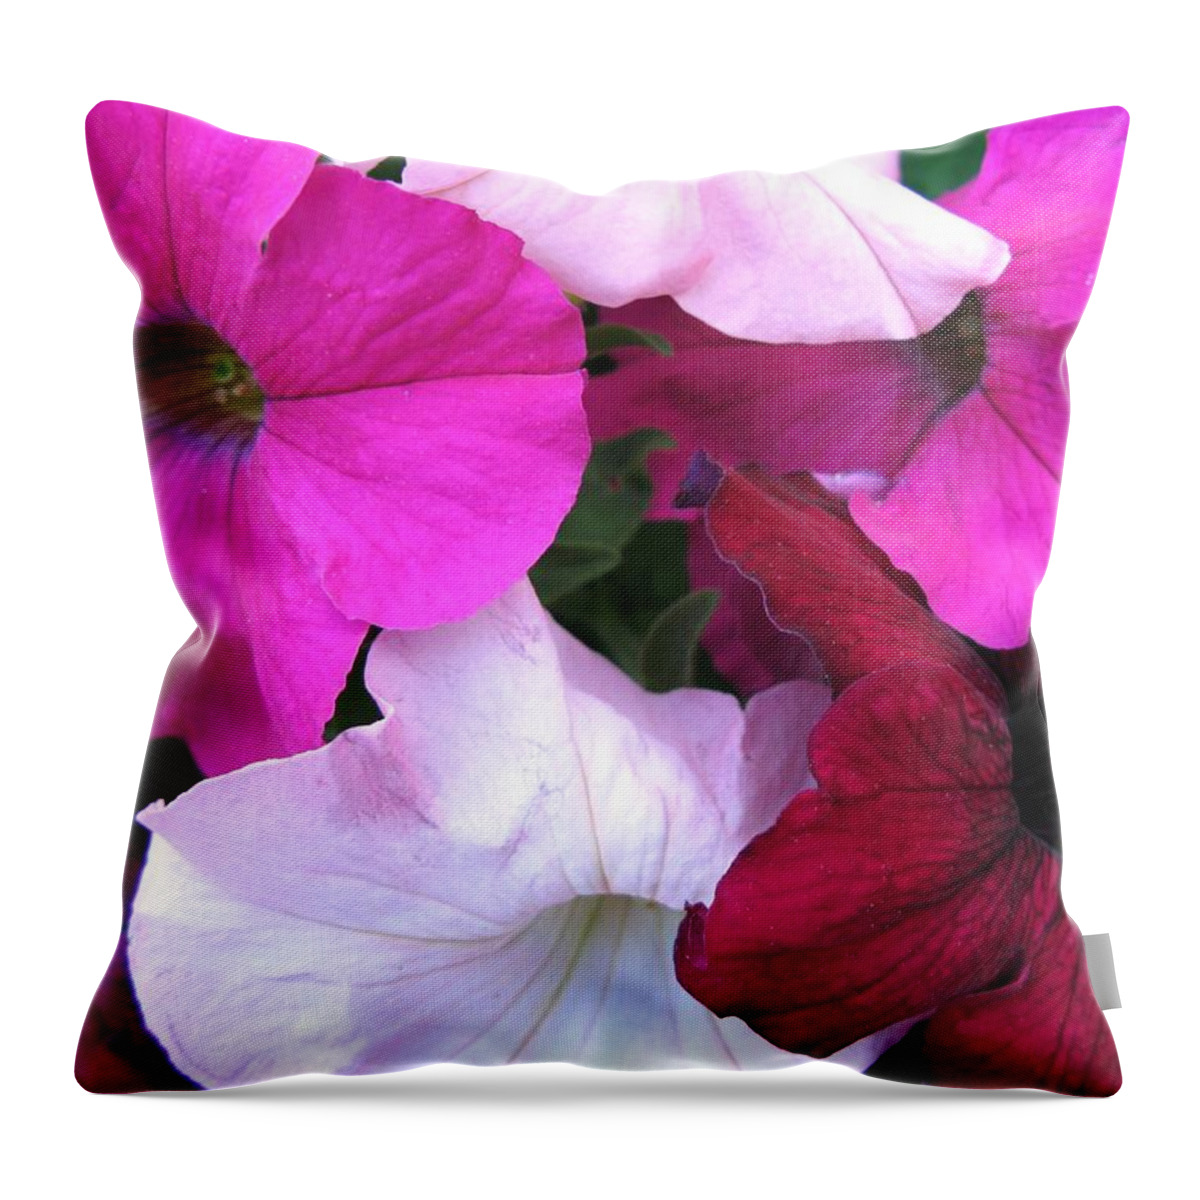 Petunias Throw Pillow featuring the photograph Mixed Petunias by Carol Sweetwood